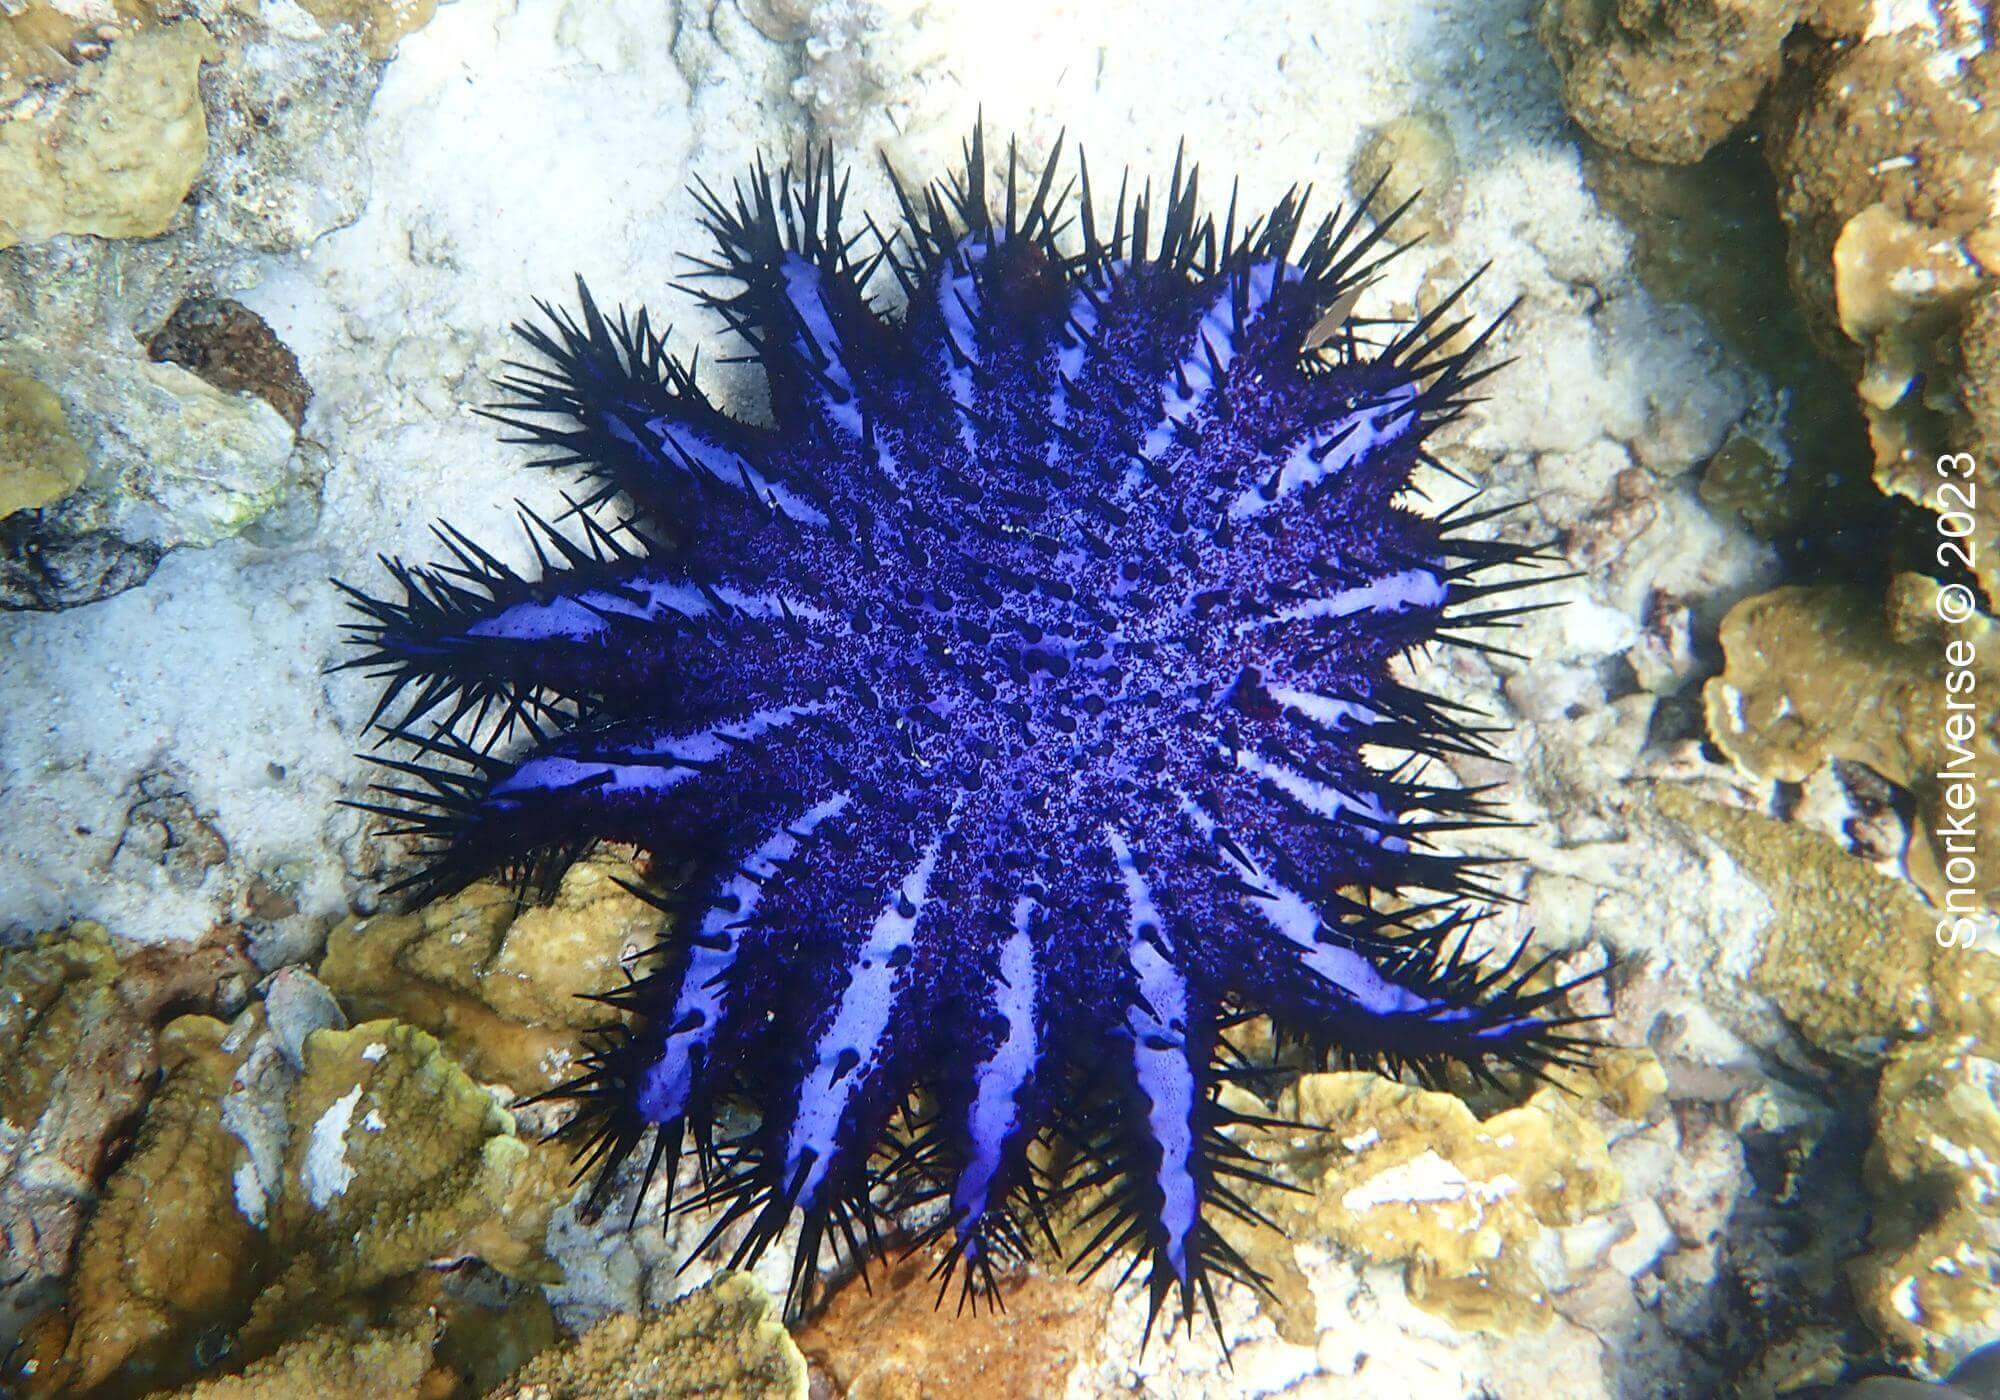 Crown Of Thorns Star Fish